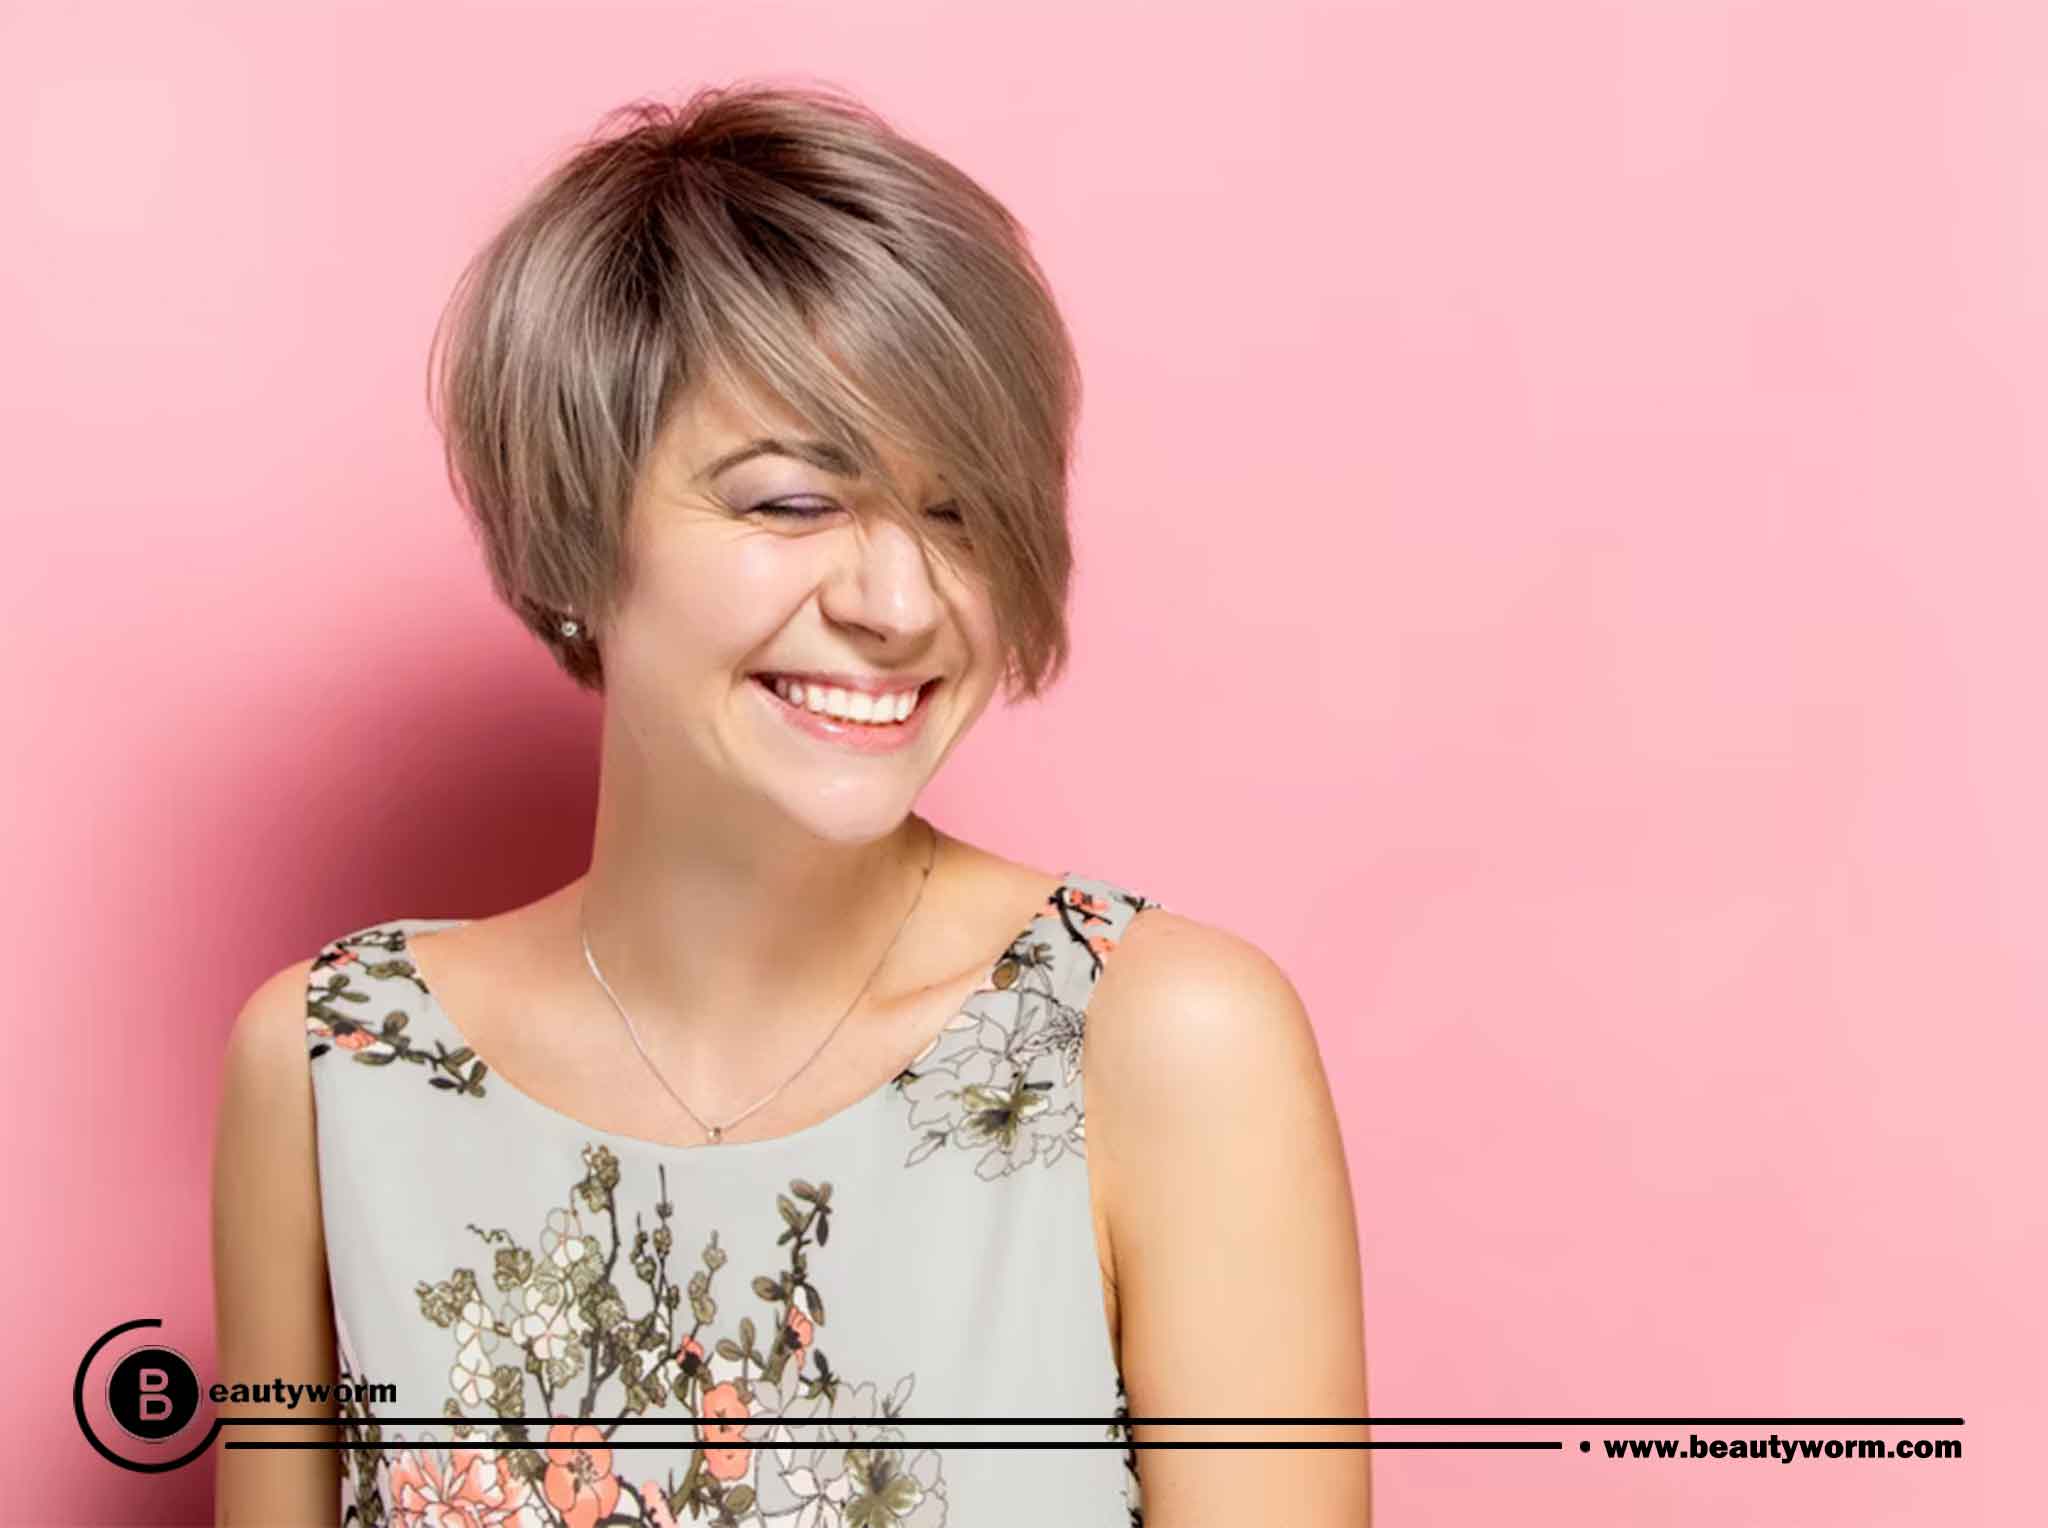 How should you choose the best short haircut for yourself?